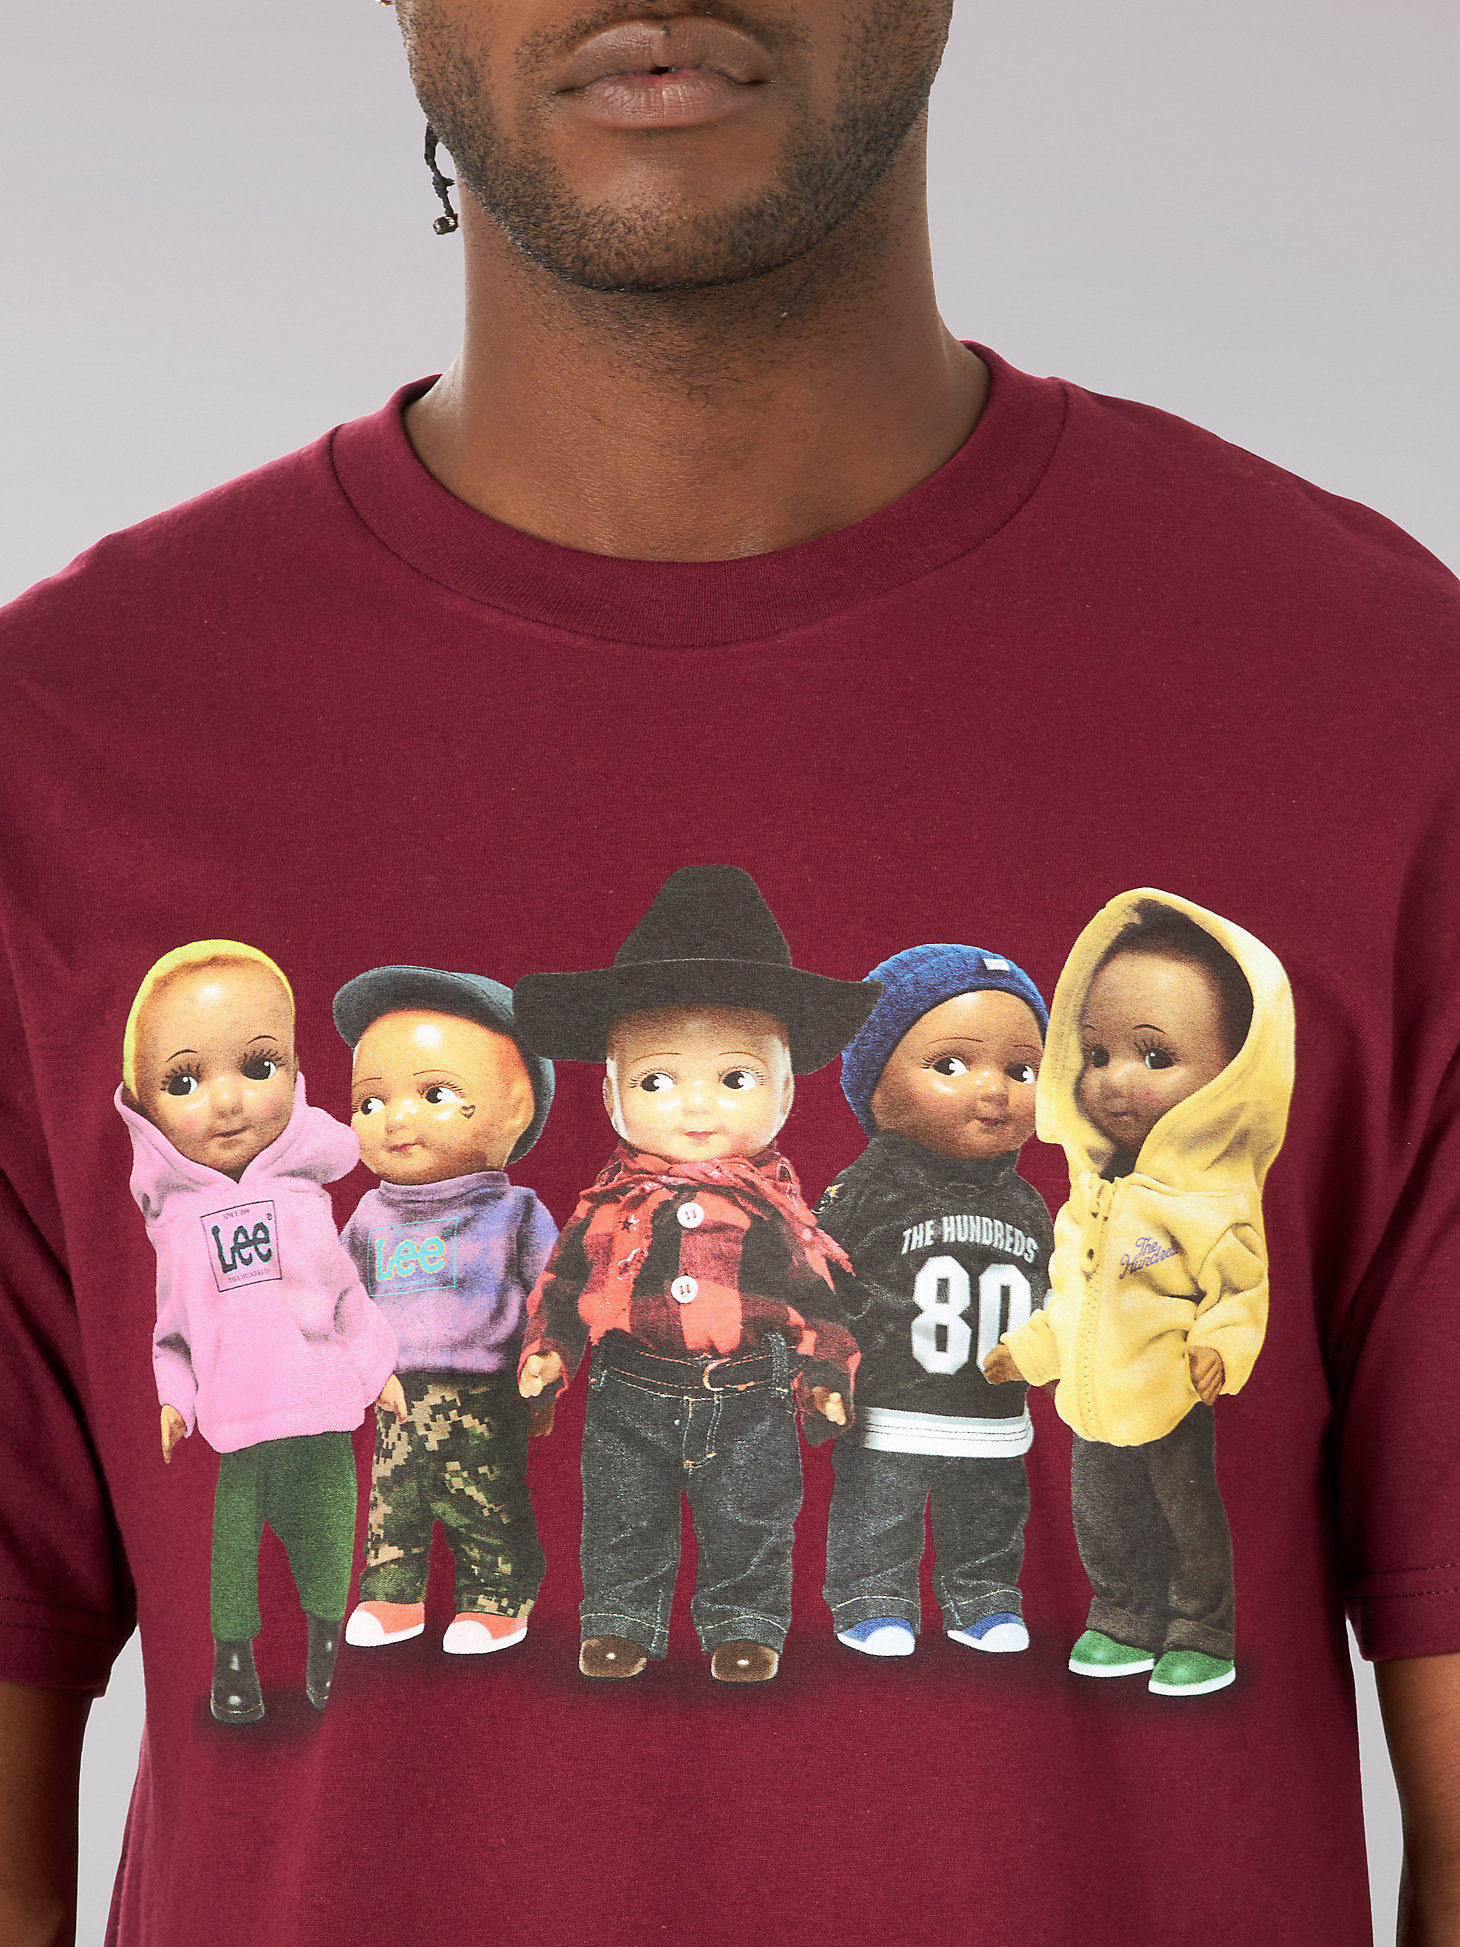 Men's Lee® x The Hundreds® Buddy Lee and Friends Graphic Tee in Burgundy alternative view 1